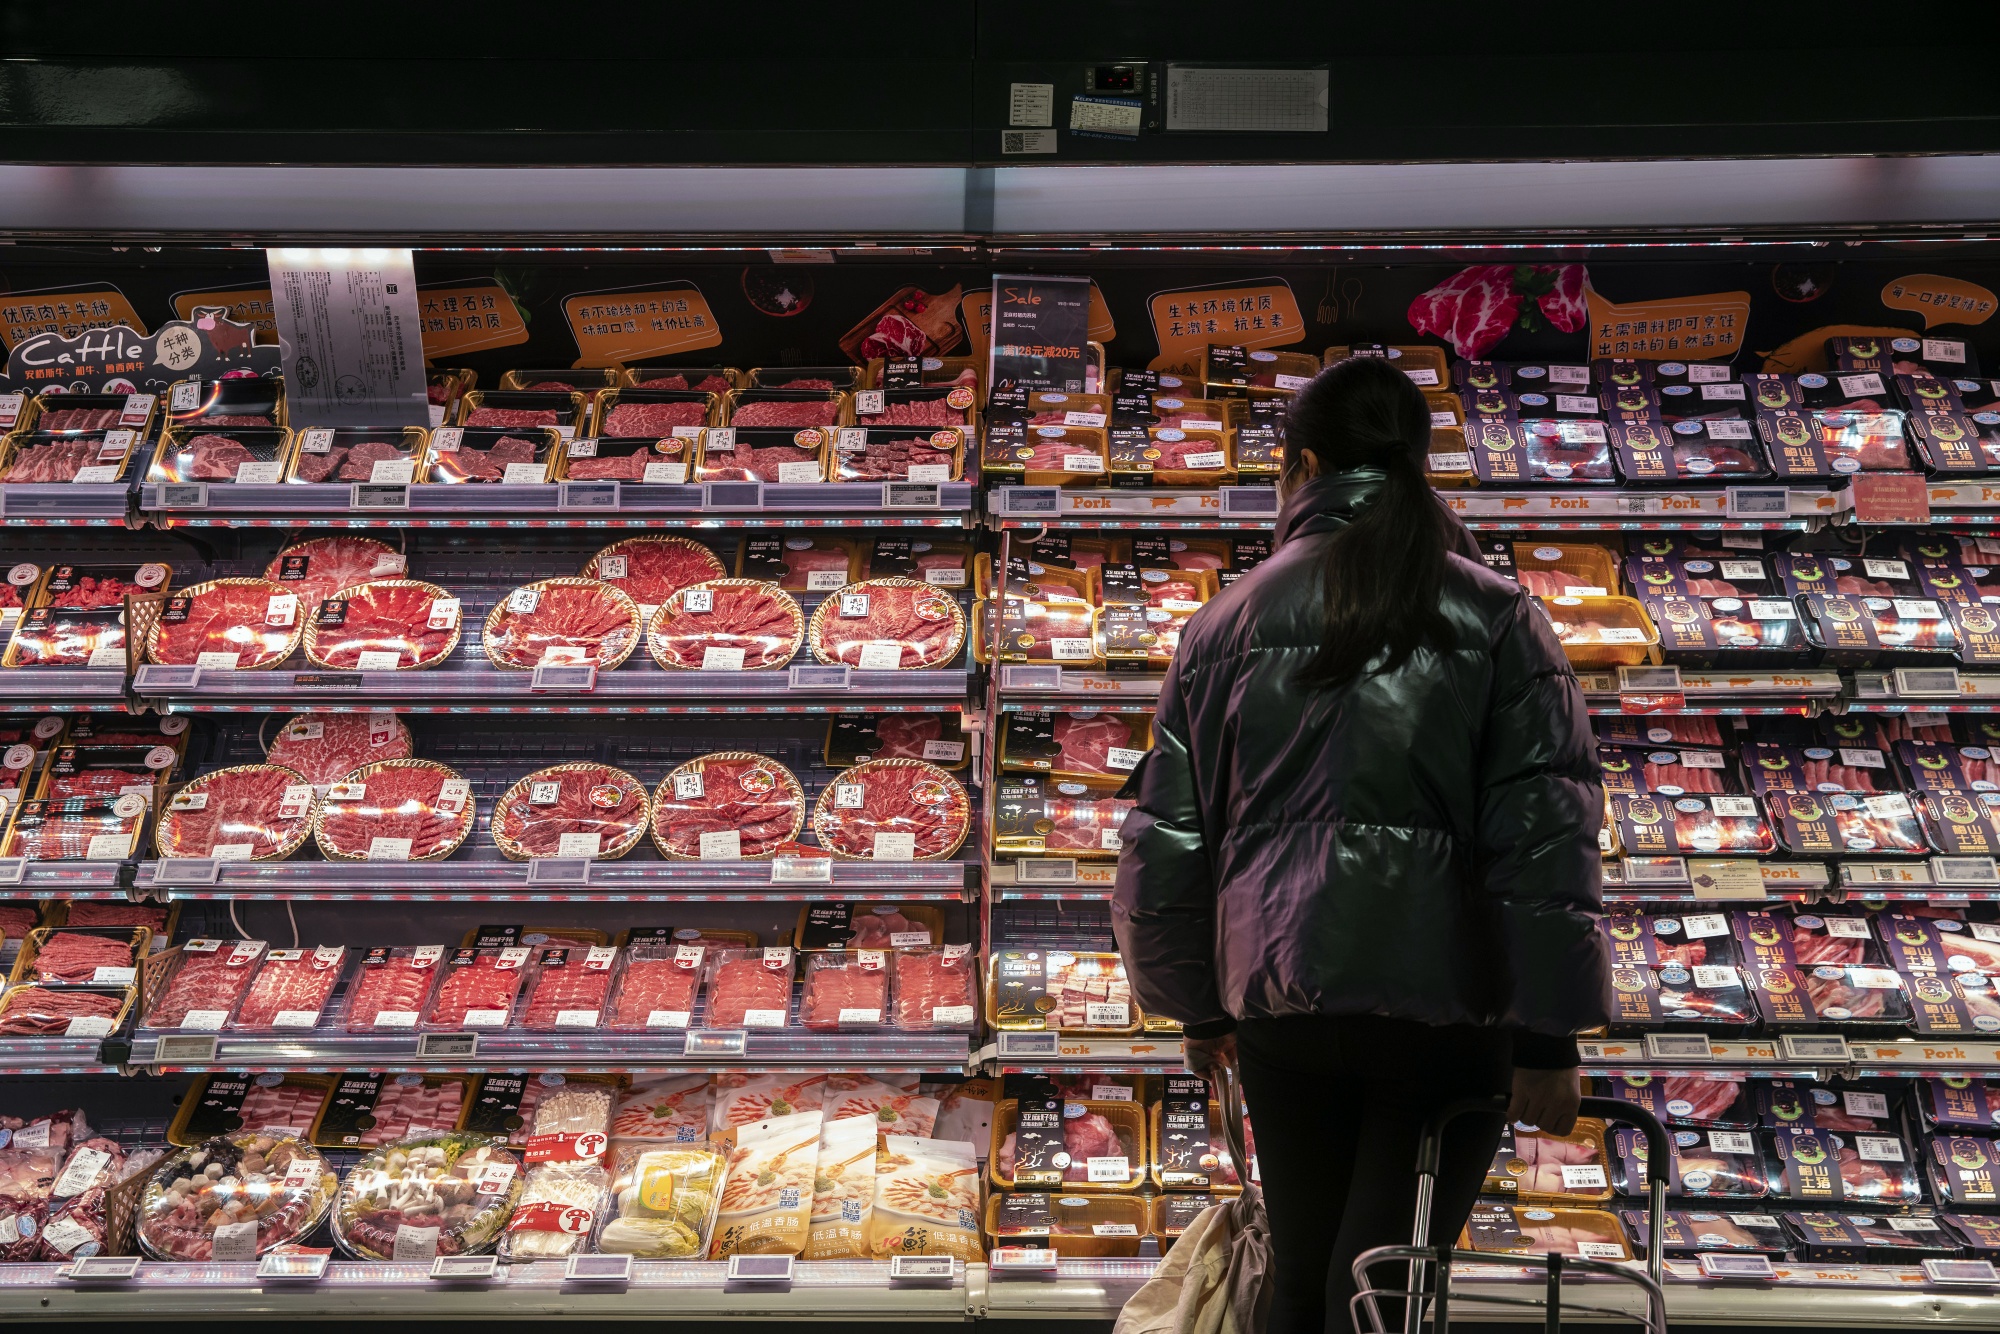 Handling of Imported Frozen Food At Ole Supermarket As China’s Disputed Virus Theory Has Shoppers Shunning Foreign Food 